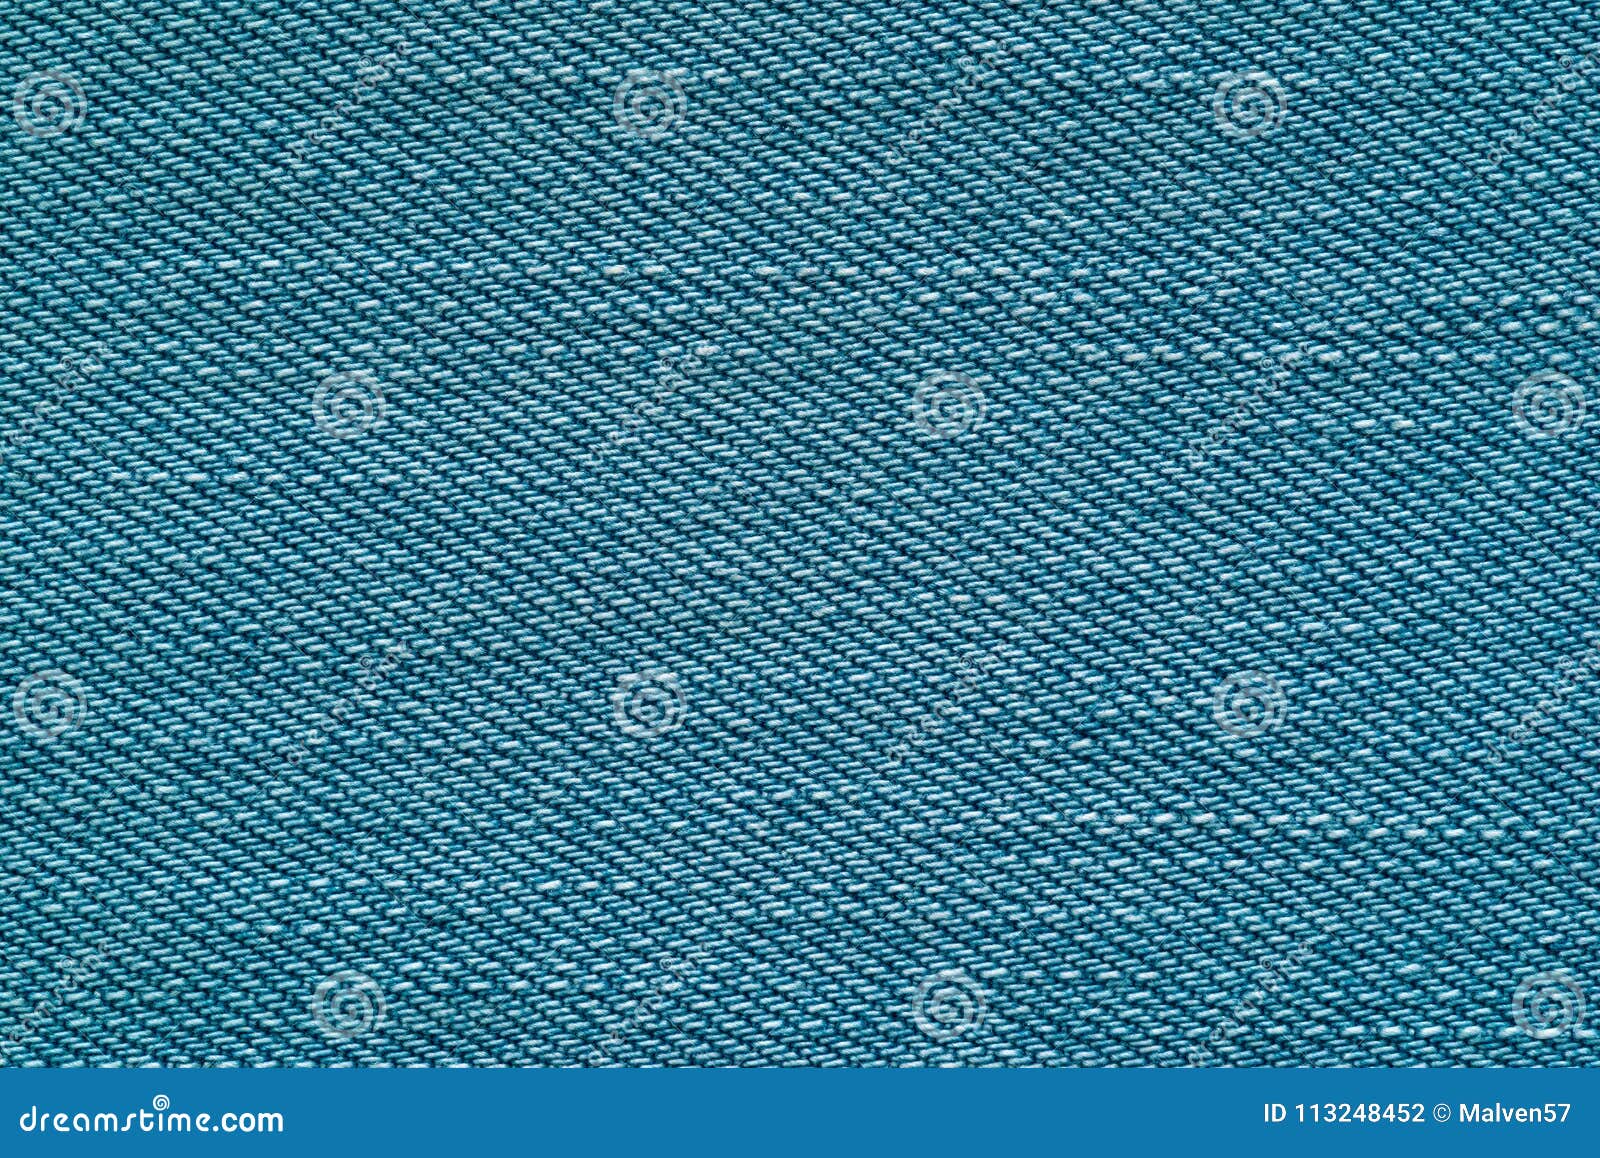 Texture of denim stock photo. Image of jeans, rough - 113248452